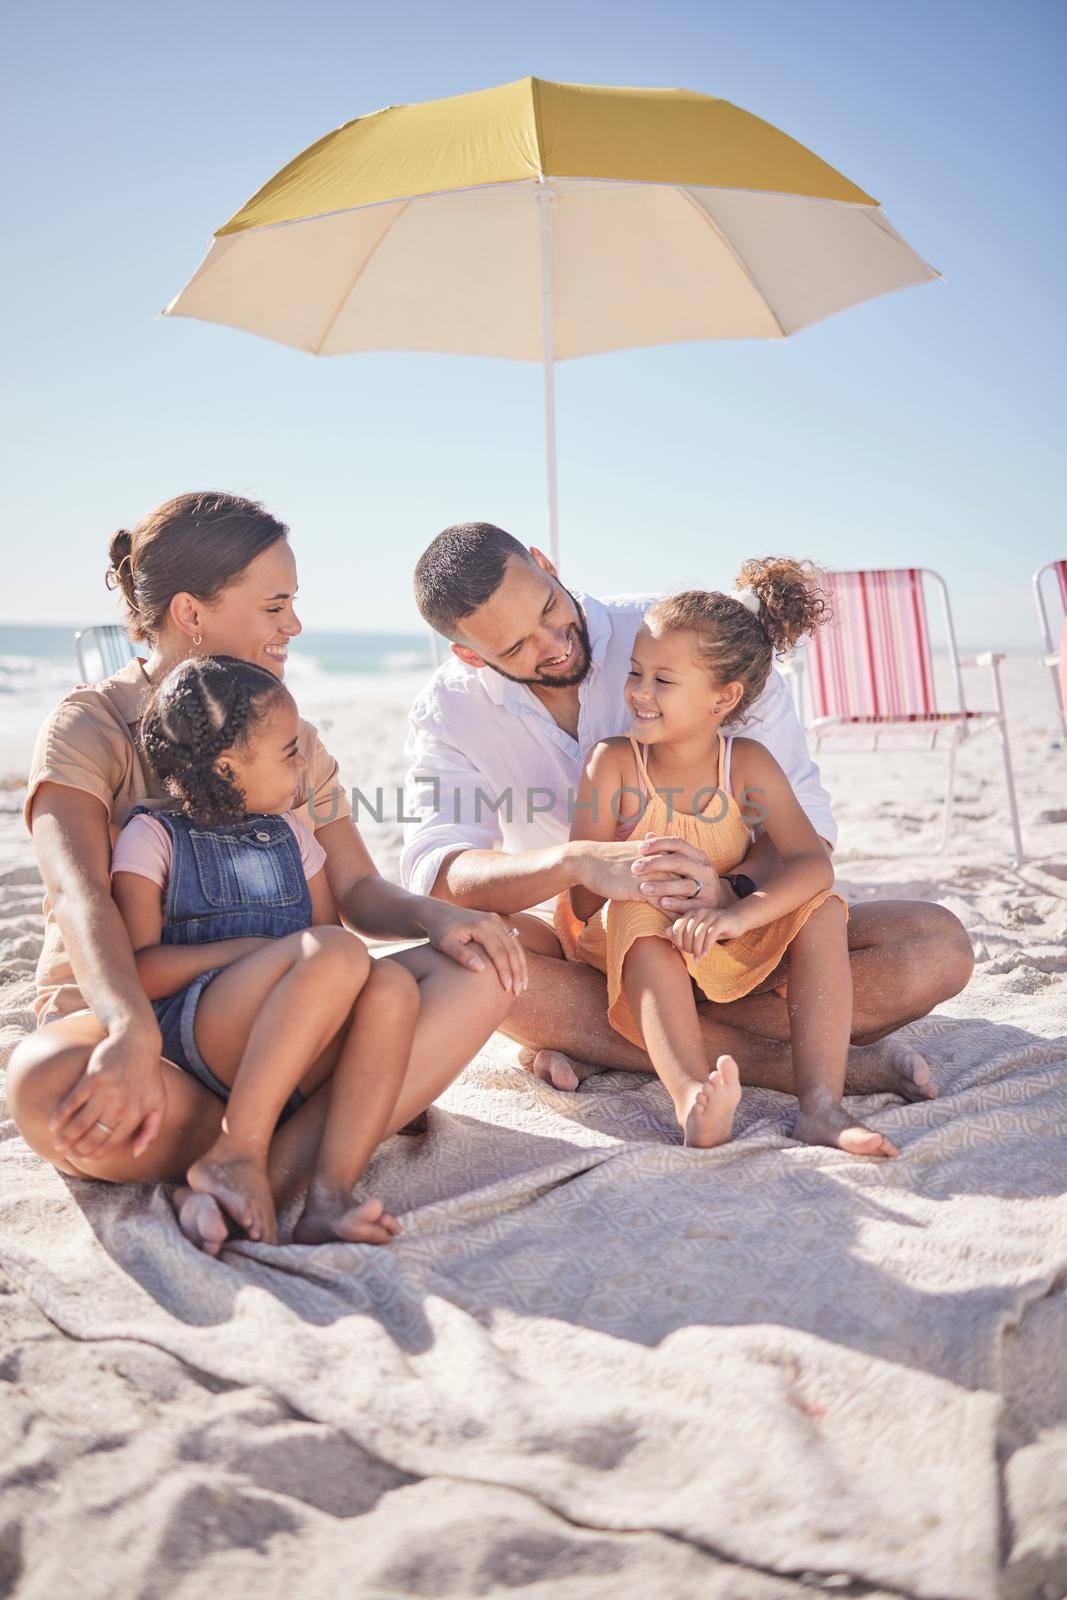 Family, happy and ocean summer experience of a mother, man and children enjoying the sea on sand. Happiness smile of kids and people together with quality time sitting in nature with a beach umbrella.